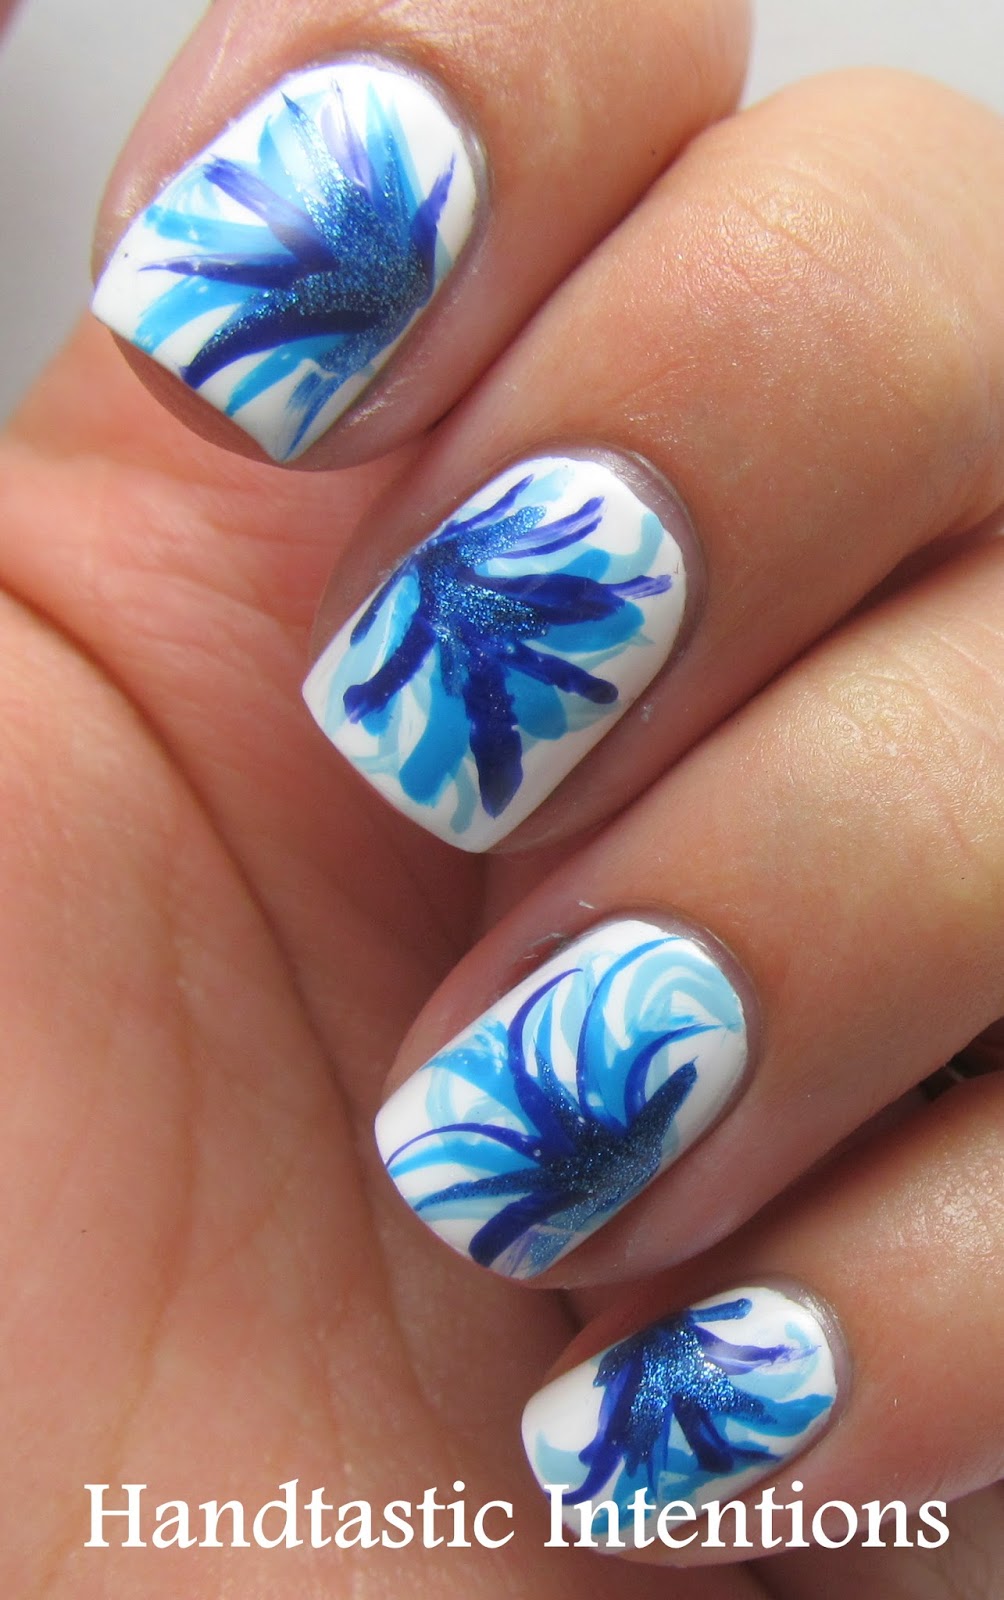 Handtastic Intentions: Nail Art: Blue Flowery Wisps